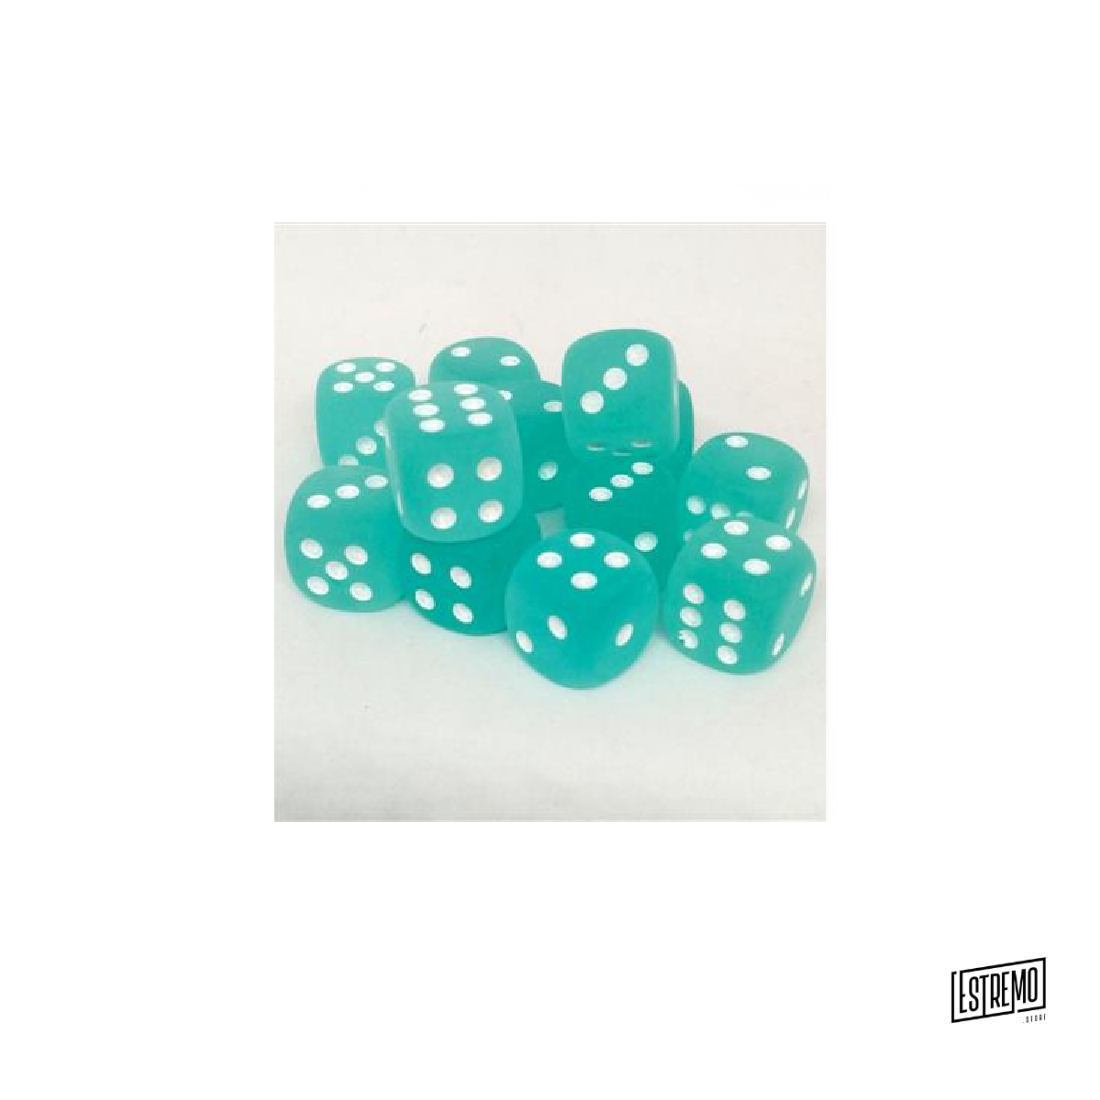 CHESSEX 16MM D6 WITH PIPS DICE BLOCKS (12 DICE) - FROSTED TEAL W/WHITE